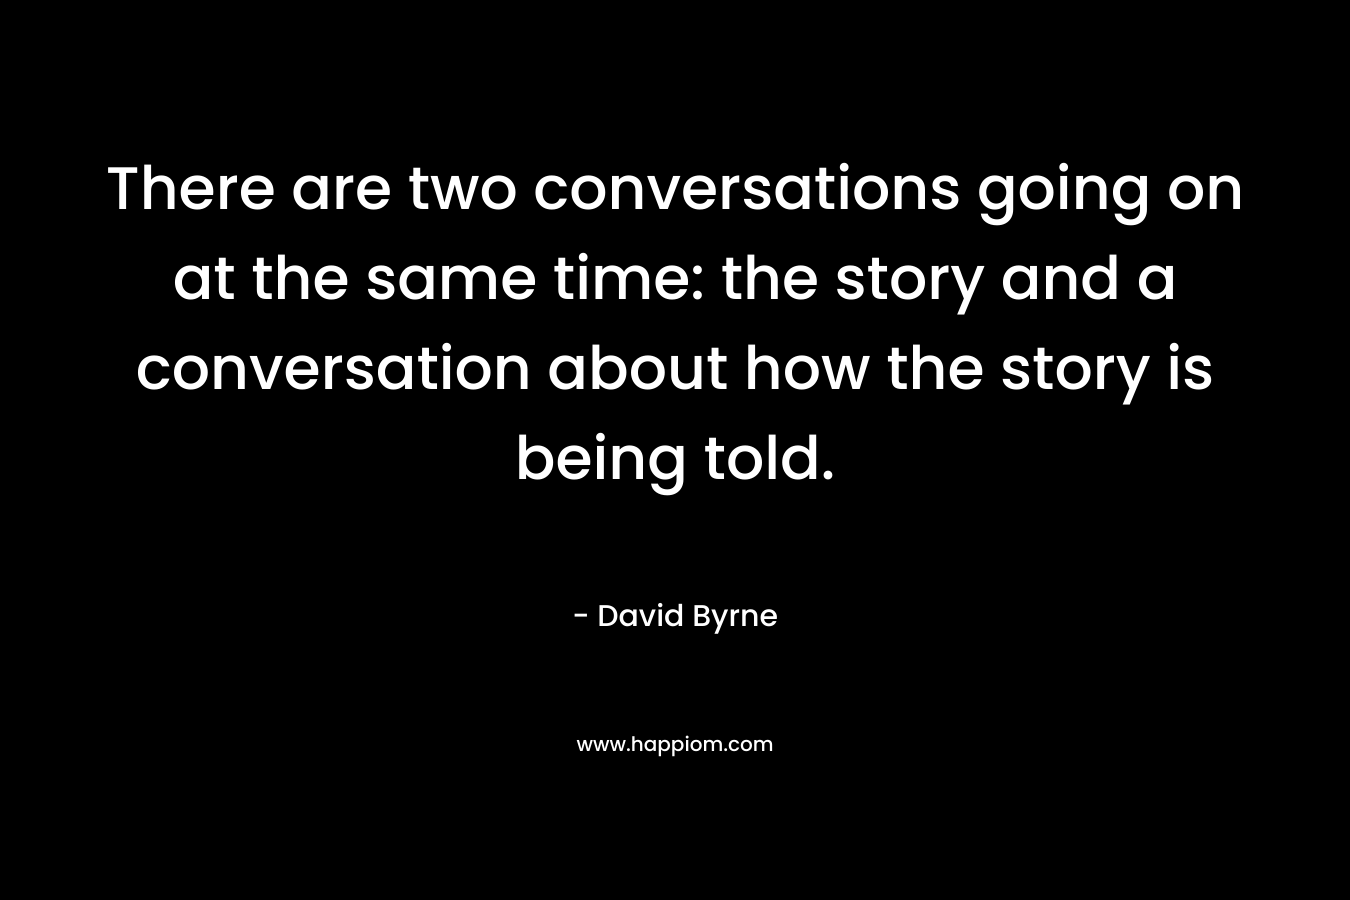 There are two conversations going on at the same time: the story and a conversation about how the story is being told.